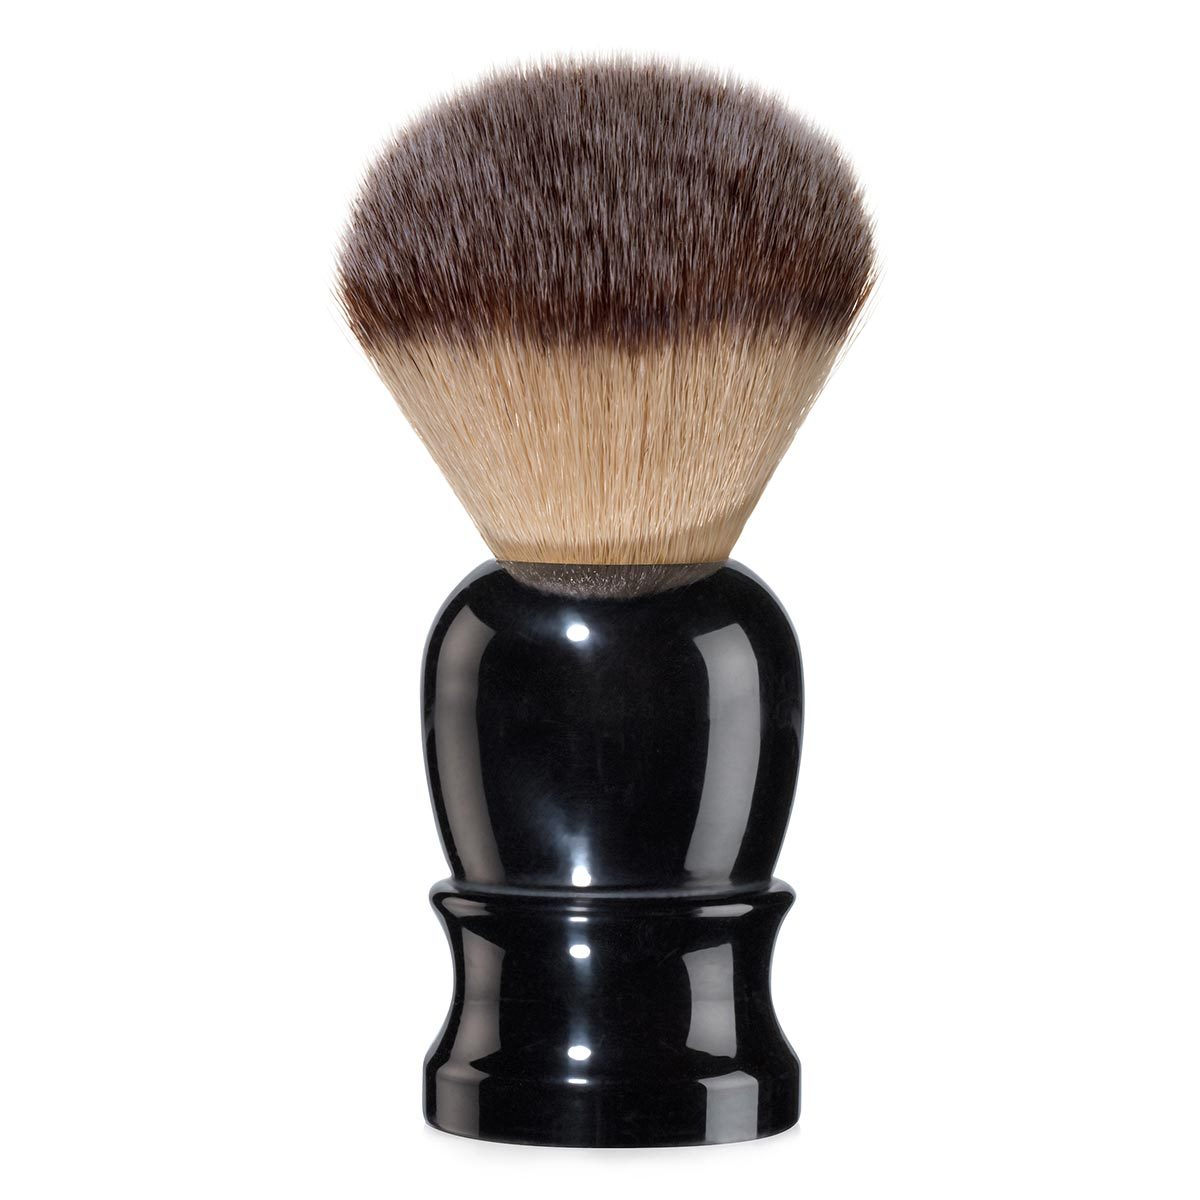 Primary image of Fine Accoutrements Classic Angel Hair Shave Brush - Black 20mm Shave Brush